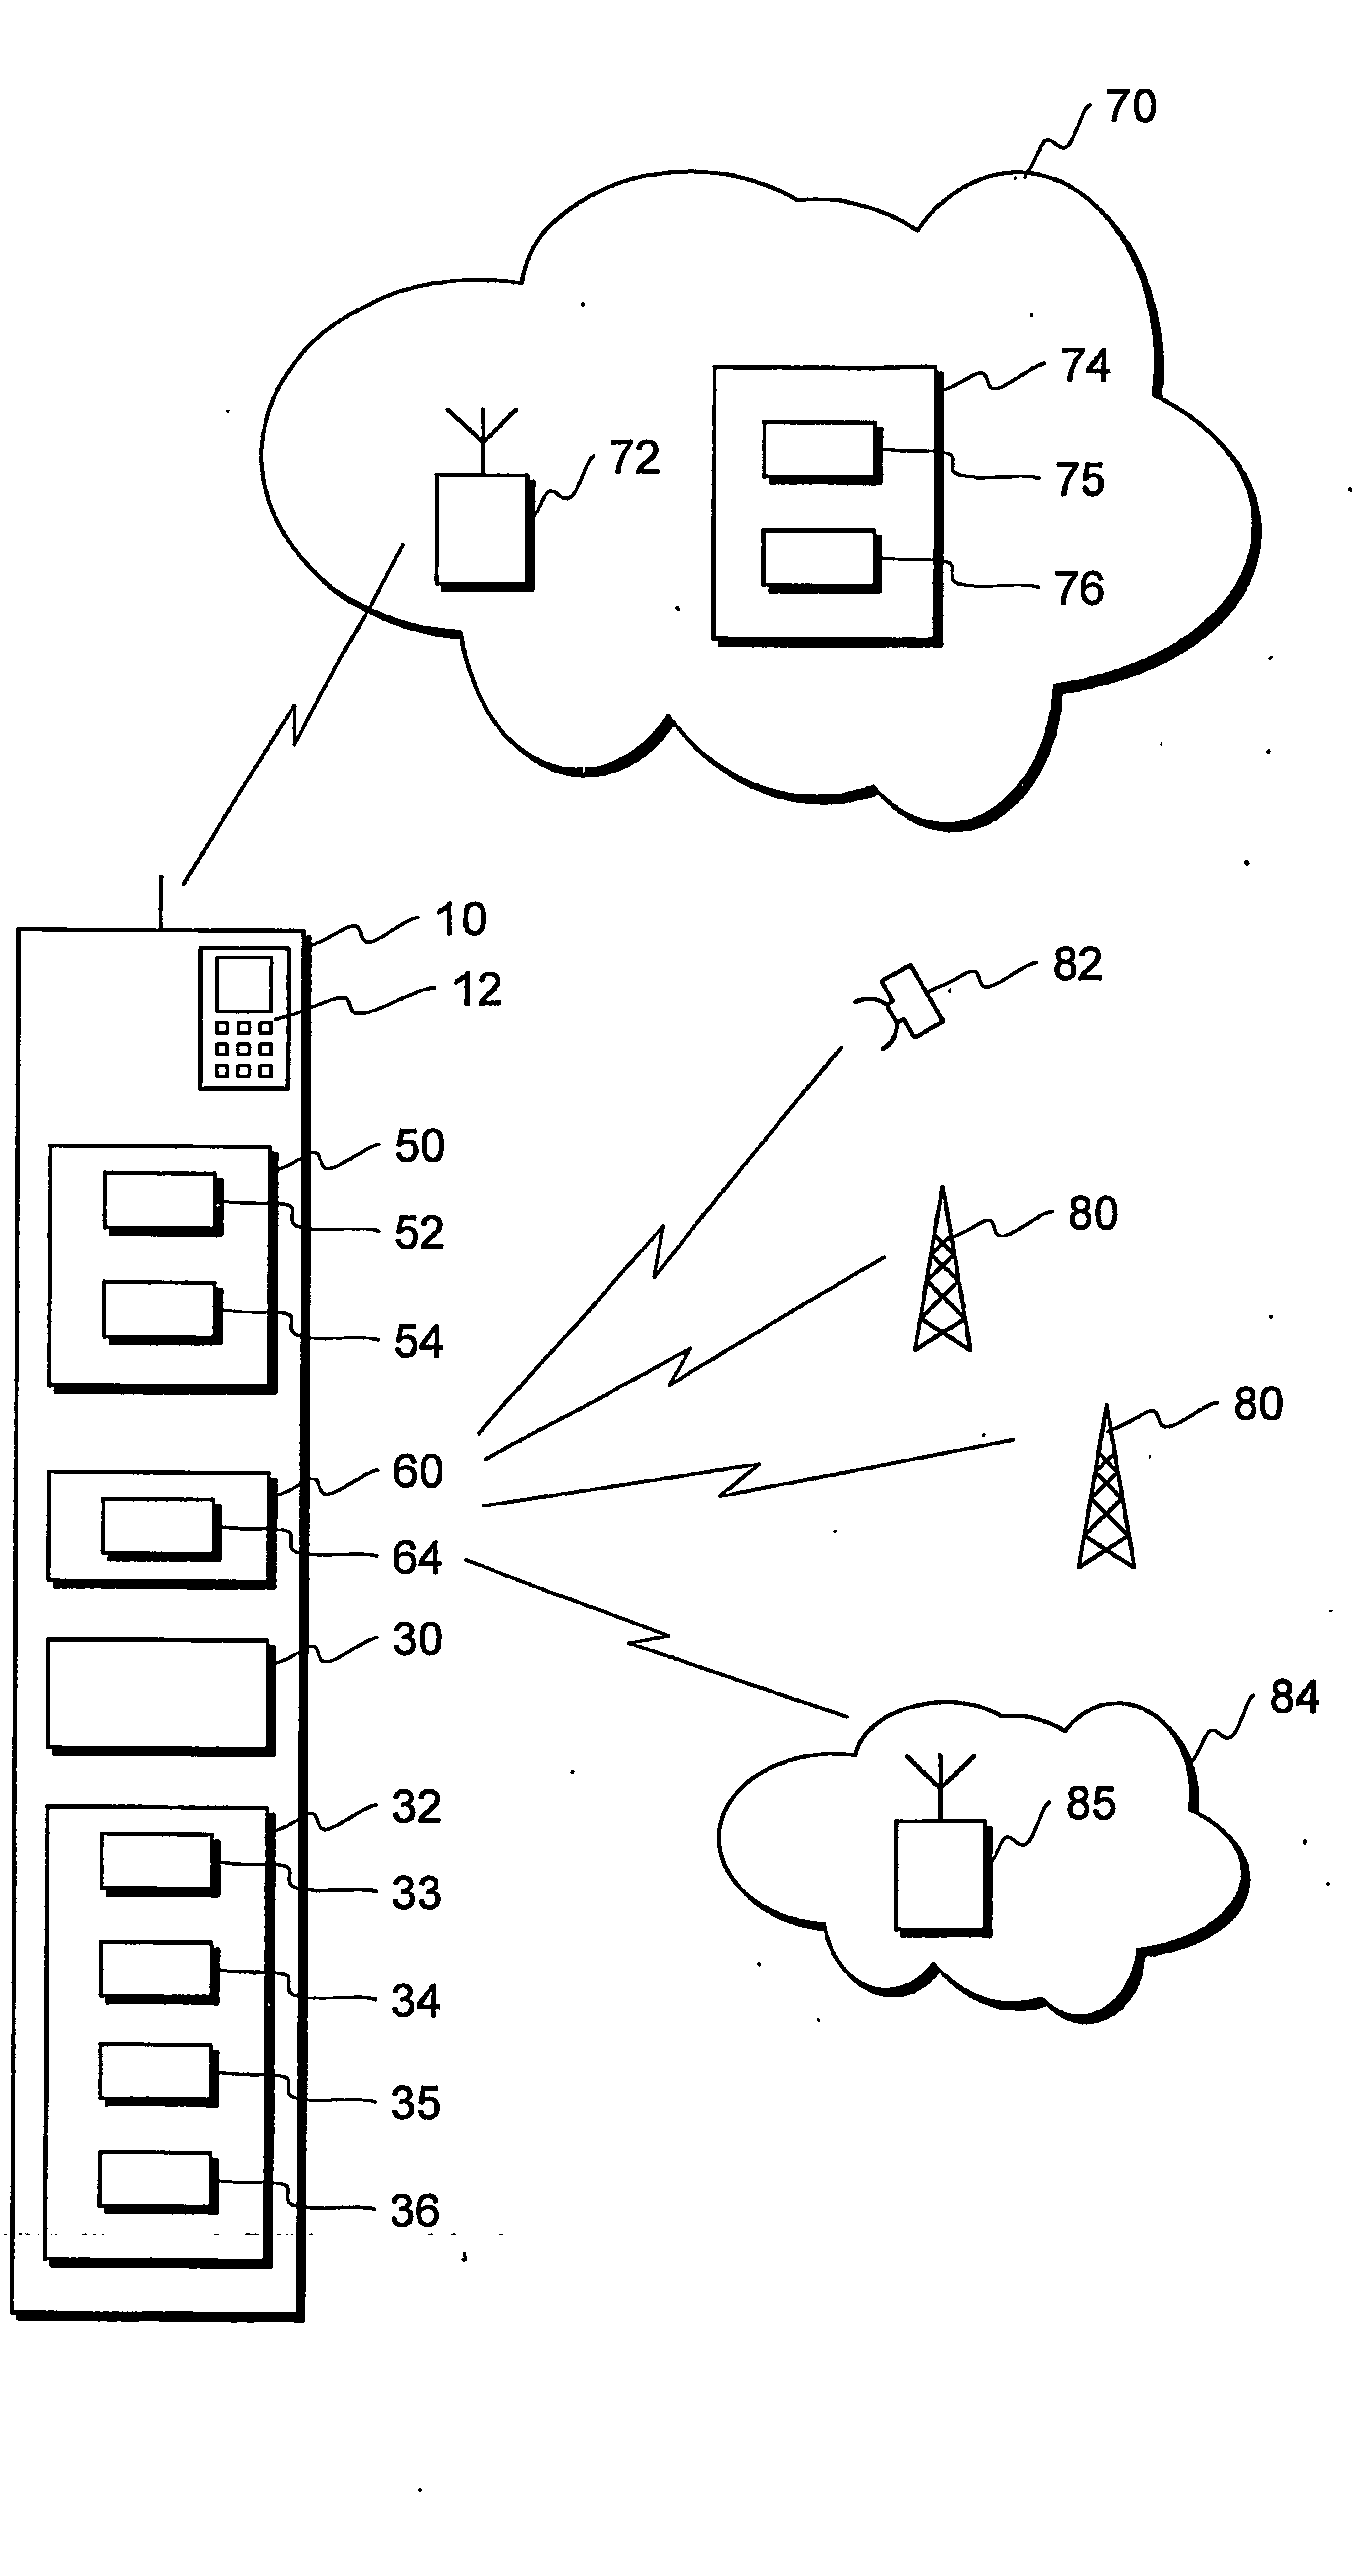 Method for reducing interference